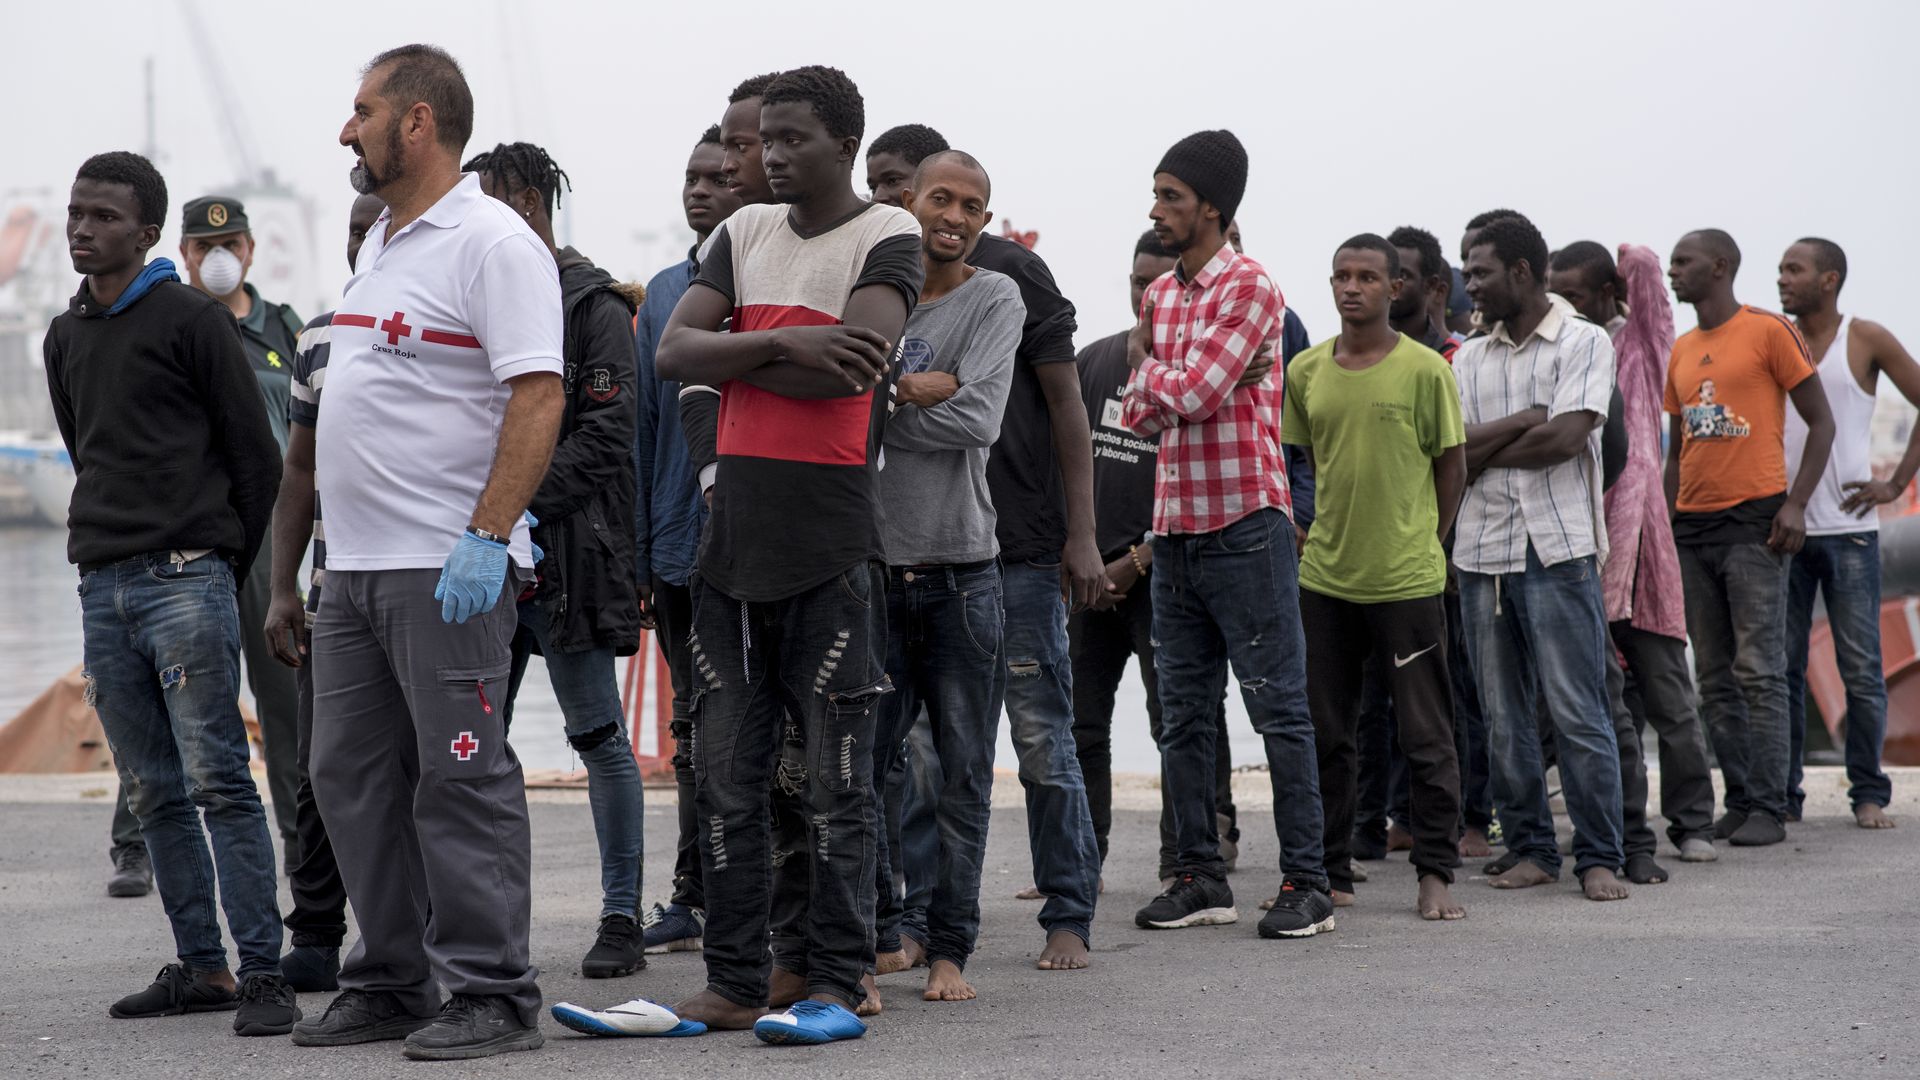 Migrants who were rescued by Spanish authorizes. Photo: Carlos Gil/SOPA Images/LightRocket via Getty Images